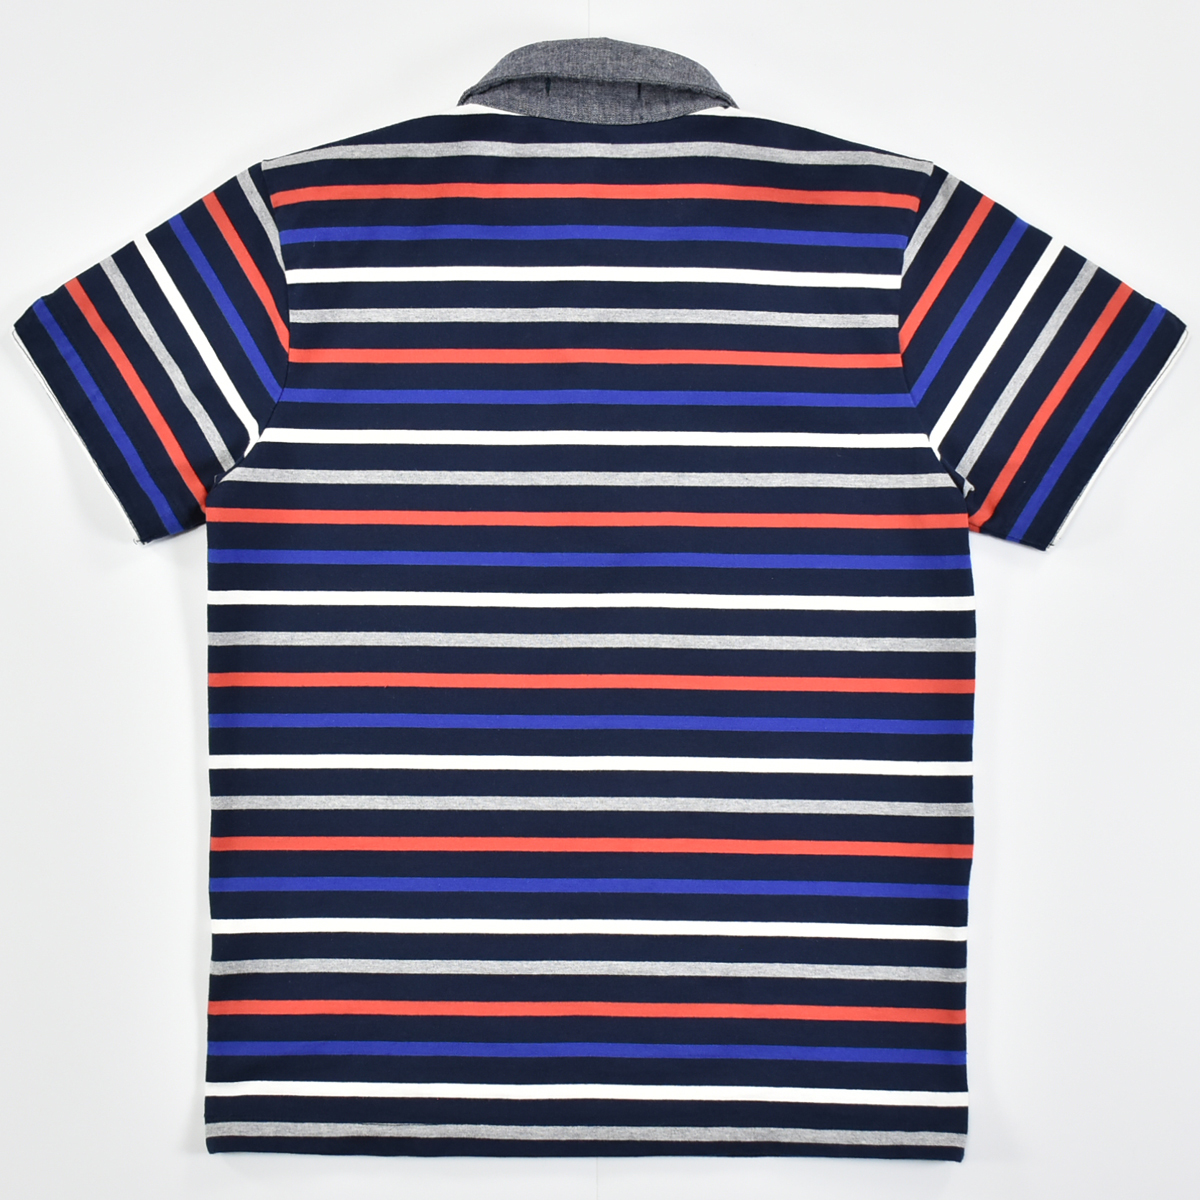  postage 300 jpy IRhythm of Life United Arrows * border polo-shirt with short sleeves multicolor men's S